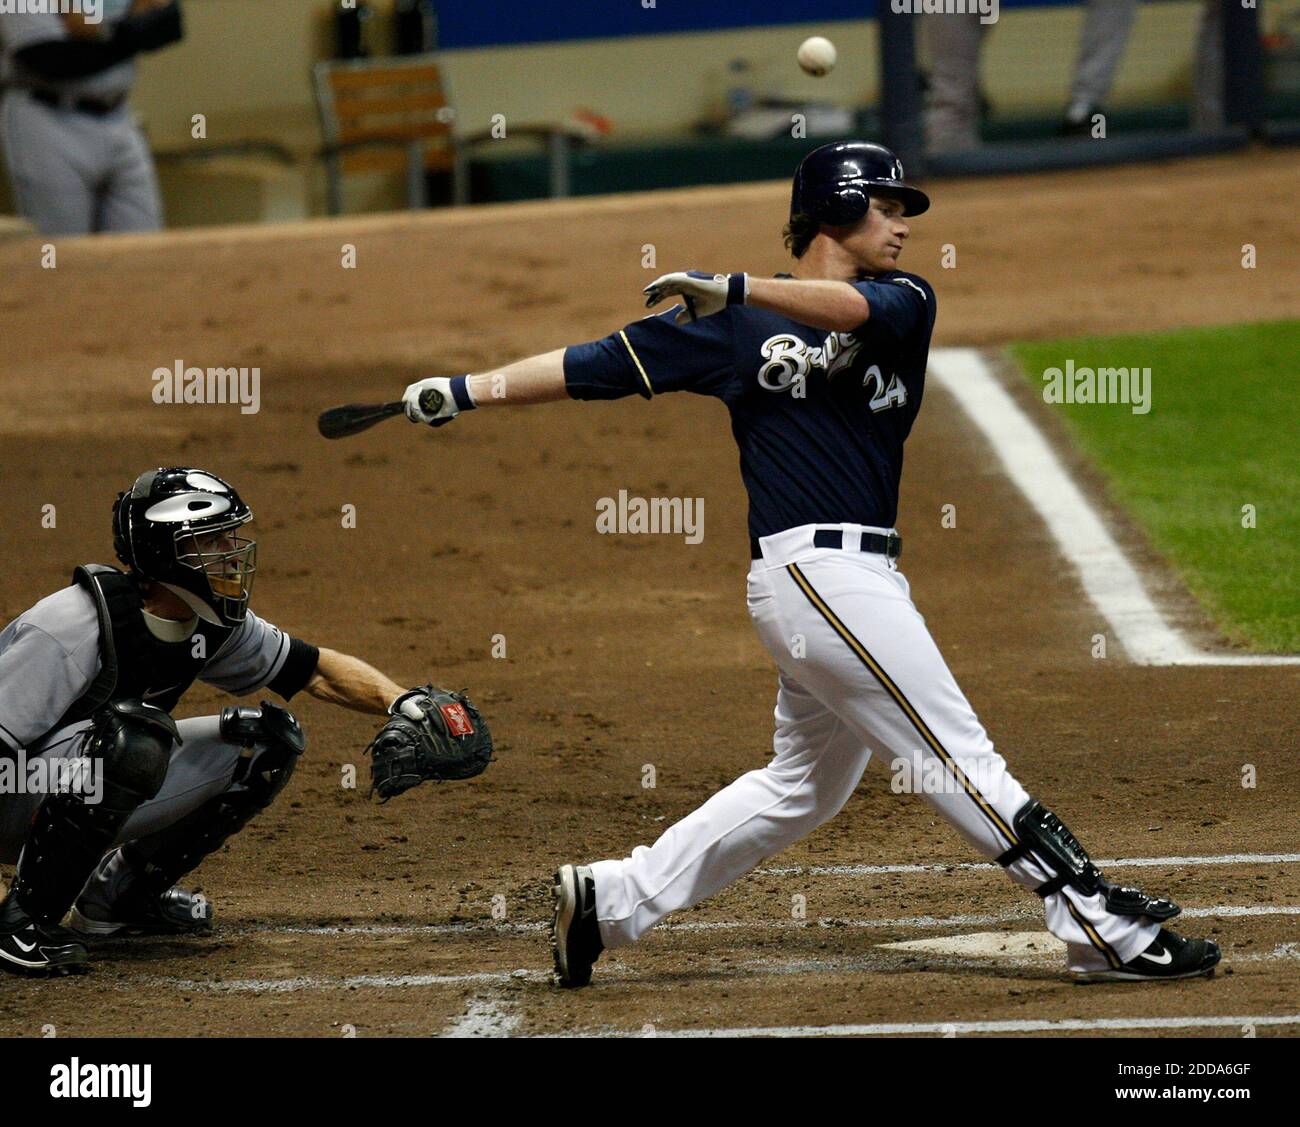 NO FILM, NO VIDEO, NO TV, NO DOCUMENTARY - Milwaukee Brewers' Mat Gamel fouls off a pitch against Florida Marlins' Anibal Sanchez at Miller Park in Milwaukee, WI, USA on September 23, 2010. The Brewers topped the Marlins, 8-3. Phoot by Benny Sieu/Milwaukee Journal Sentinel/MCT/Cameleon/ABACAPRESS.COM Stock Photo